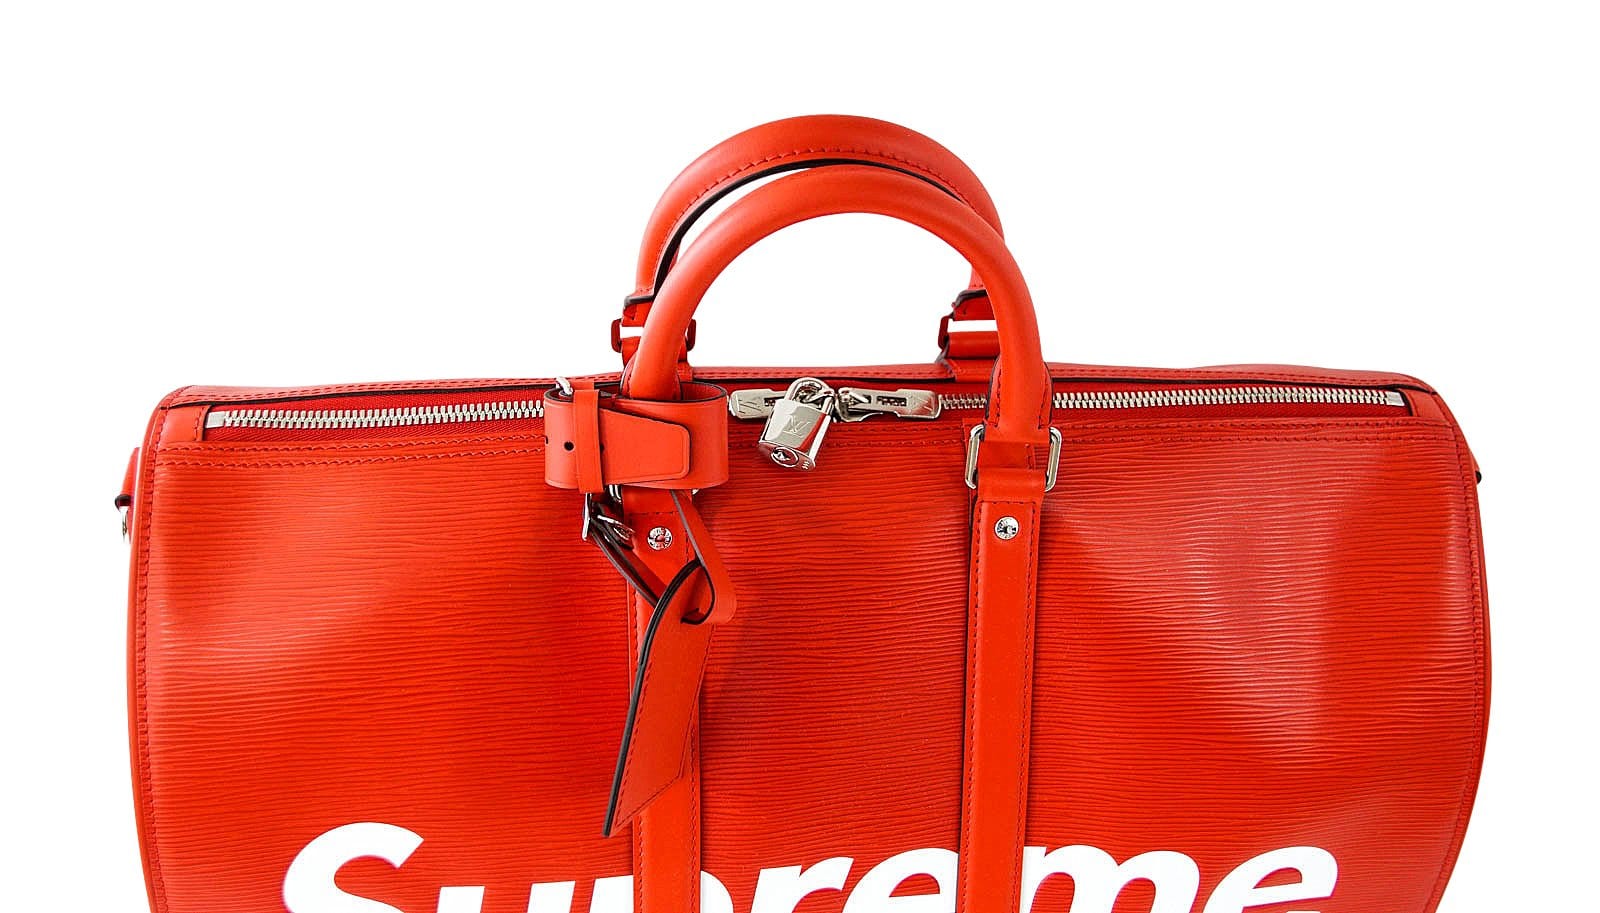 Louis Vuitton X Supreme Keepall Bandouliere Epi 45 Red at the Time